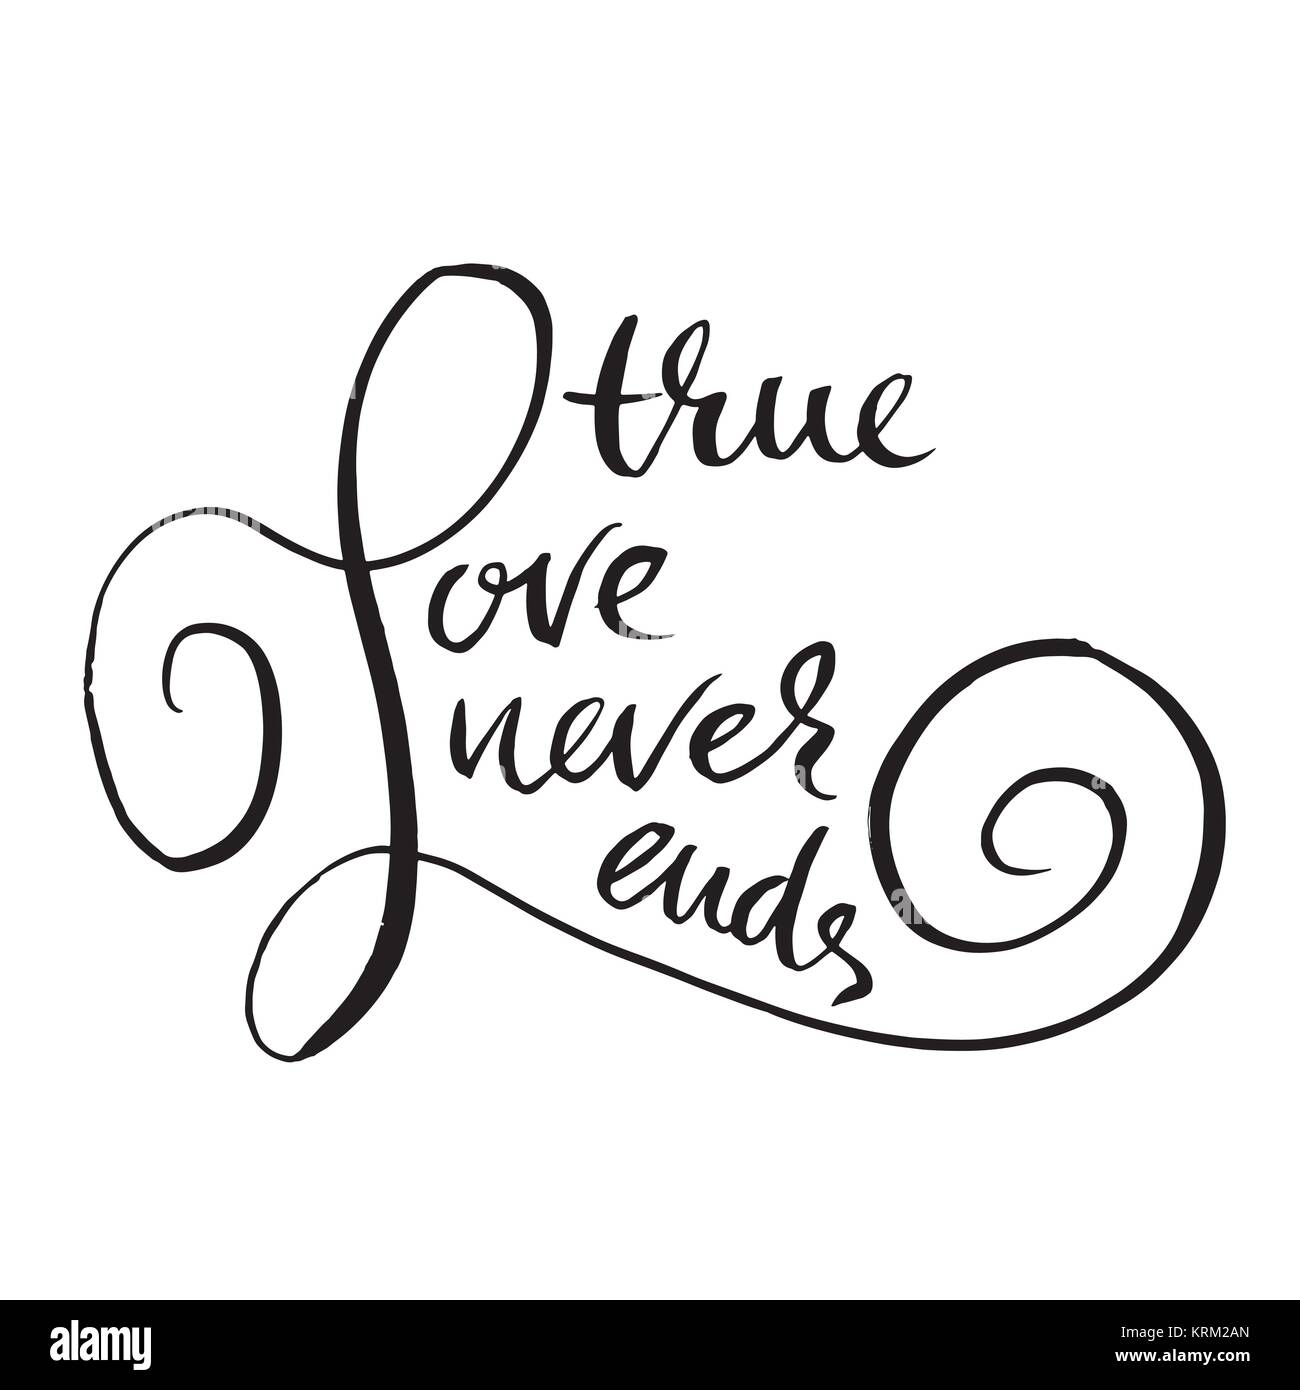 True Love Lettering Calligraphy. Royalty Free SVG, Cliparts